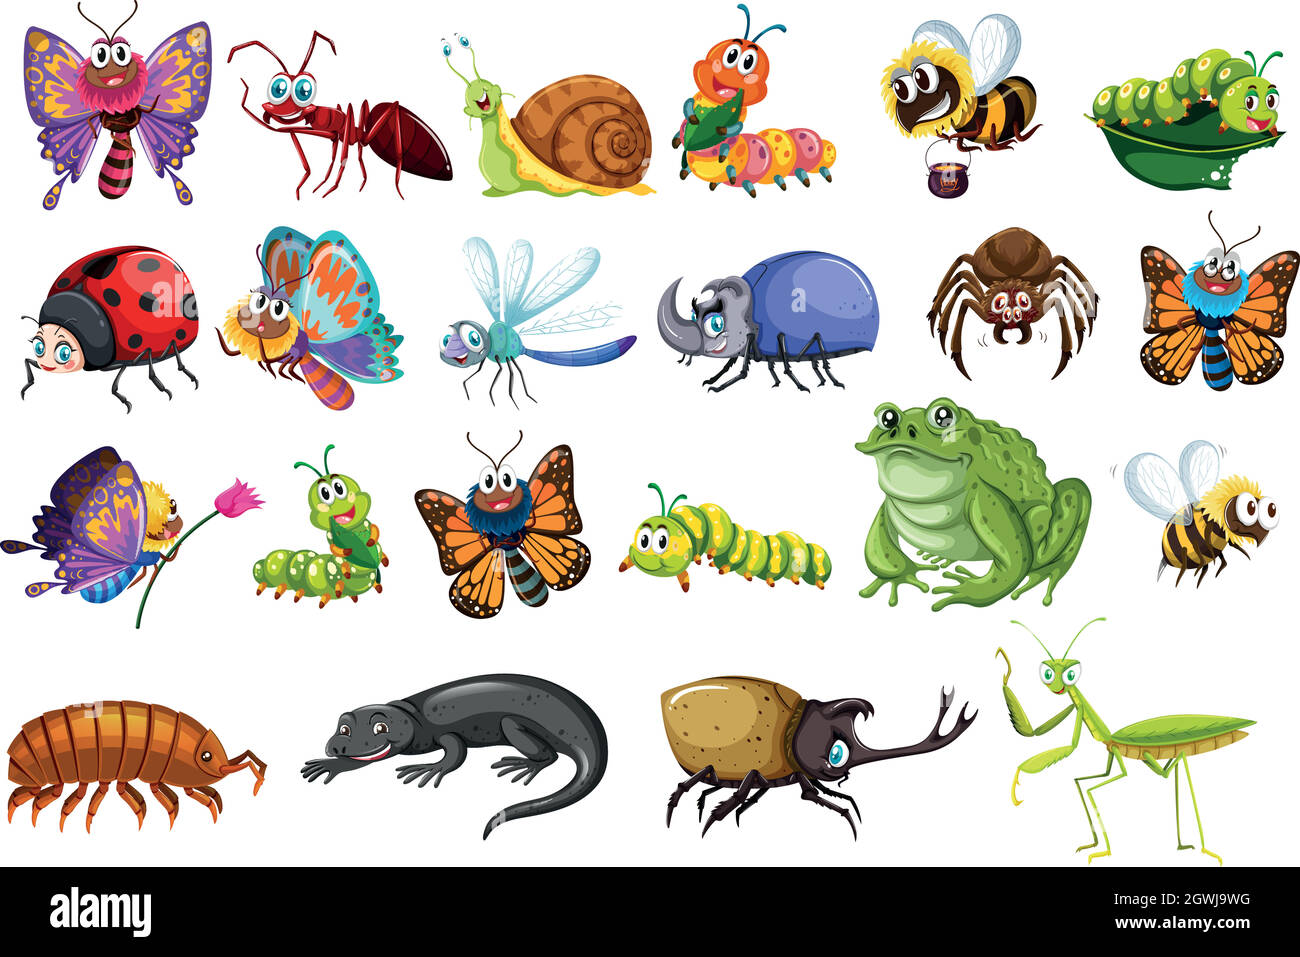 Set of insects including butterflies, ants, beetles, lizards, frogs and bees Stock Vector